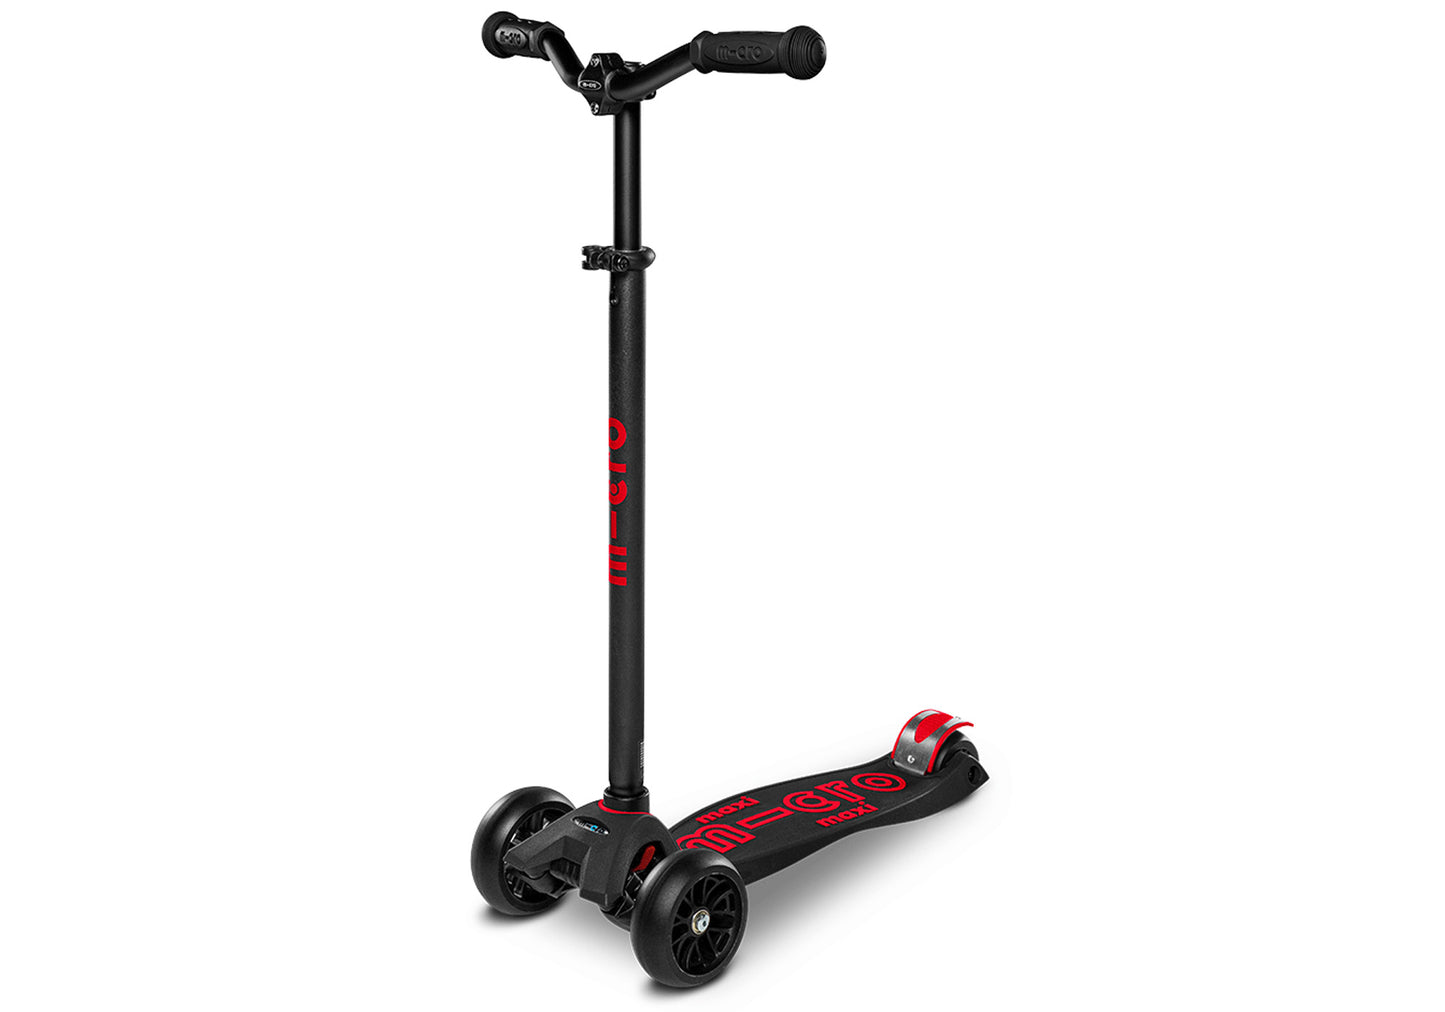 Micro Maxi Micro Deluxe Pro Scooter, Black/Red buy online at Woolys Wheels Sydney